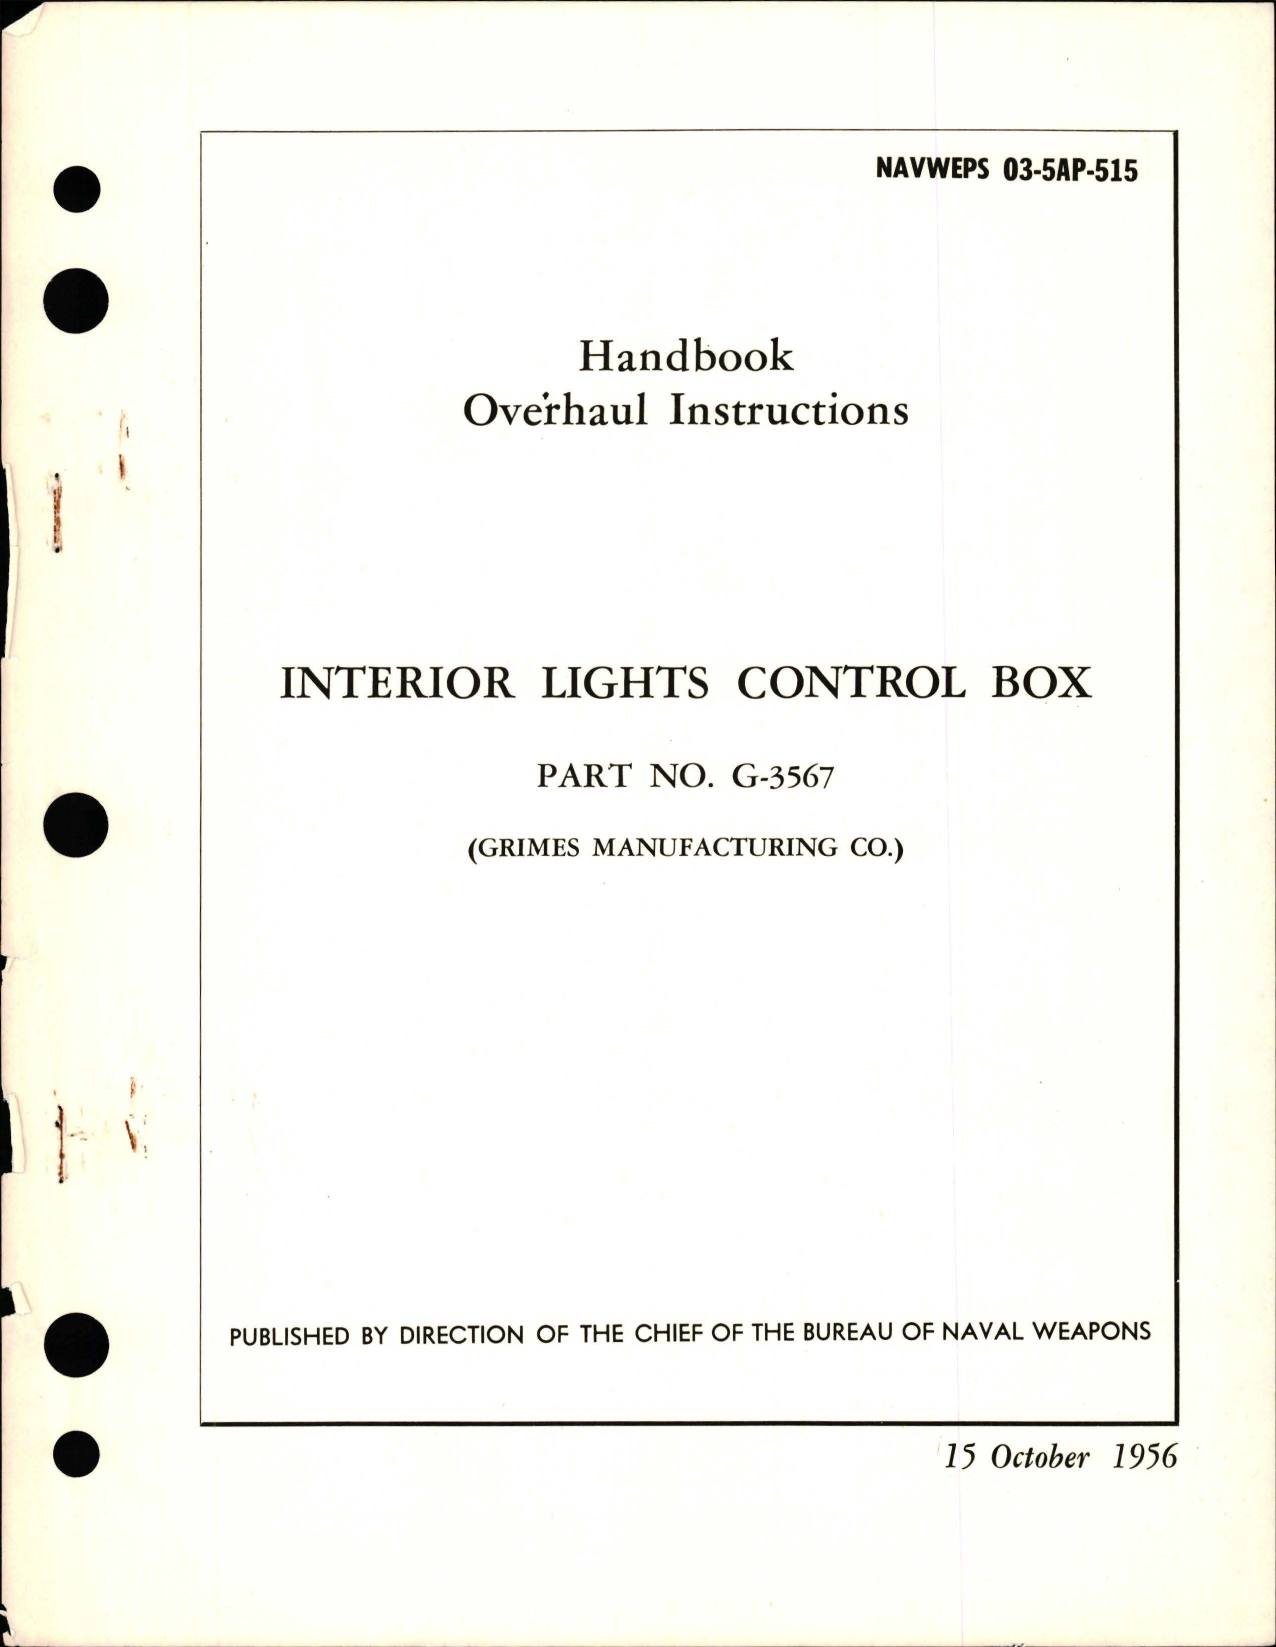 Sample page 1 from AirCorps Library document: Overhaul Instructions for Interior Lights Control Box - Part G-3567